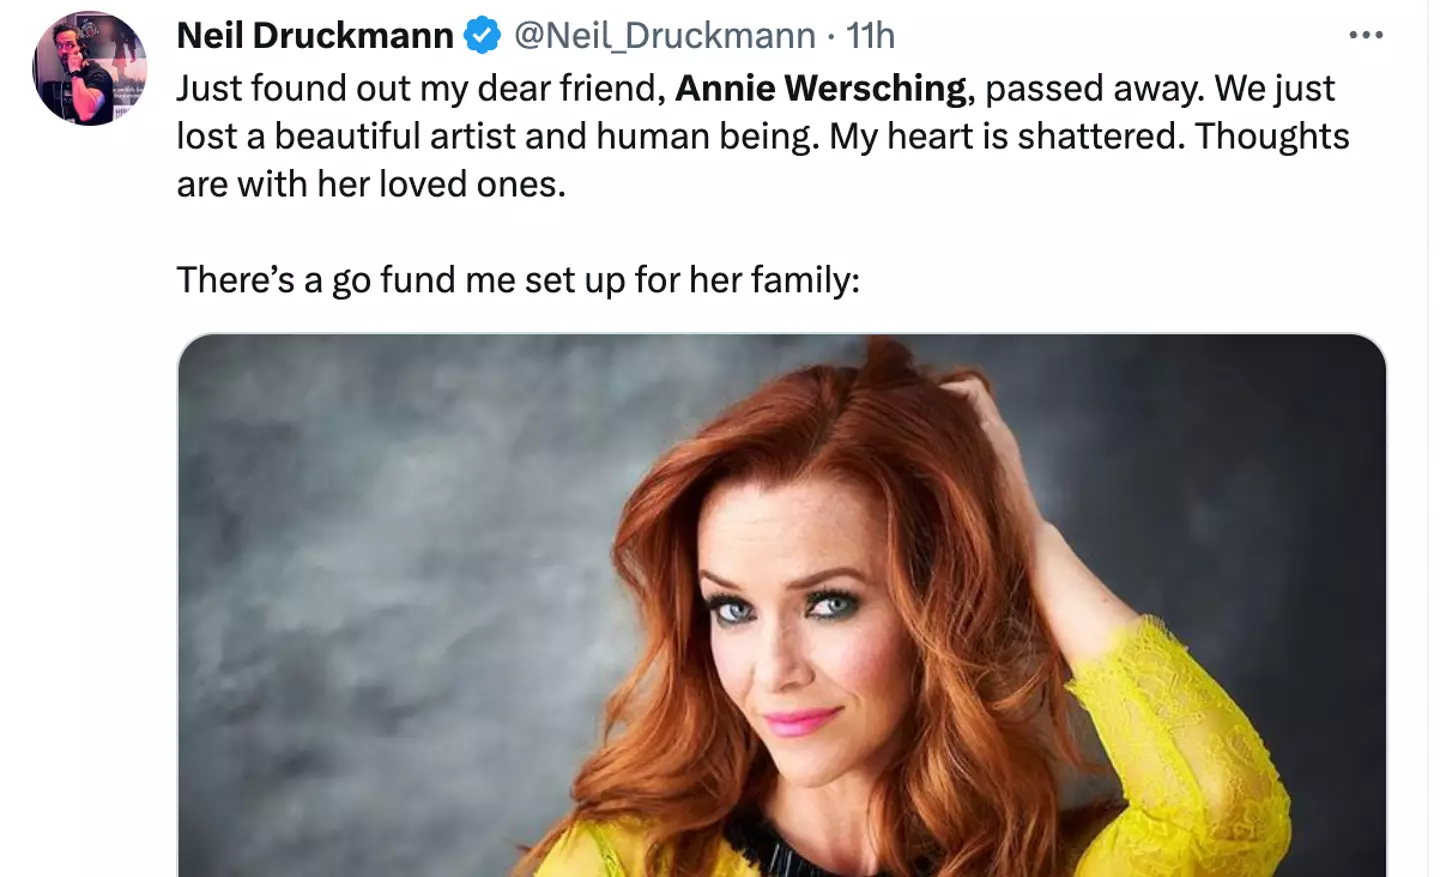 Annie passed away following a cancer diagnosis.